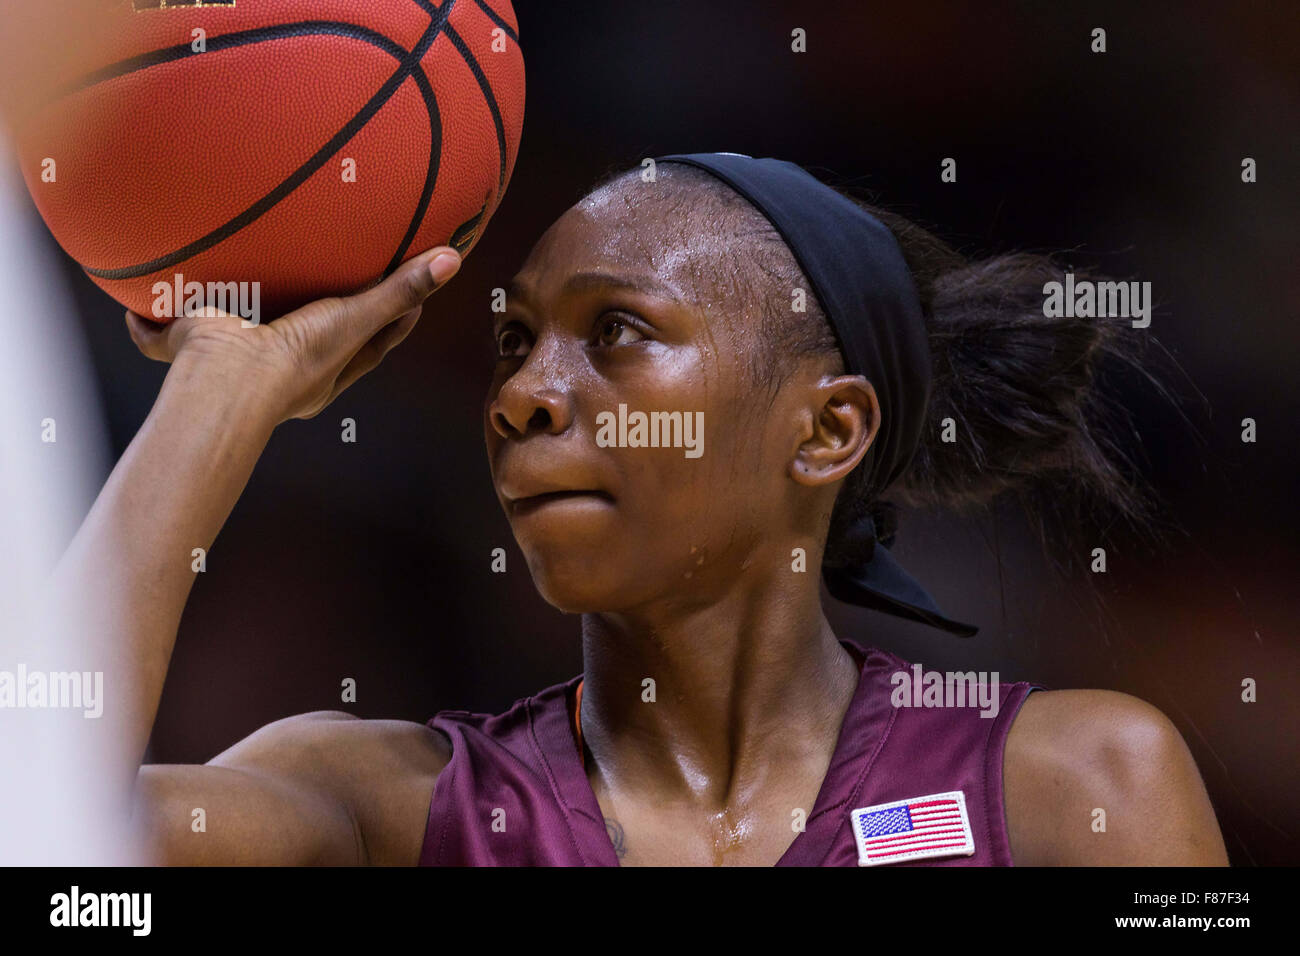 December 6, 2015: Chanette Hicks #12 of the Virginia Tech Hokies shoots a free throw during the NCAA basketball game between the University of Tennessee Lady Volunteers and the Virginia Tech Hokies at Thompson Boling Arena in Knoxville TN Tim Gangloff/CSM Stock Photo